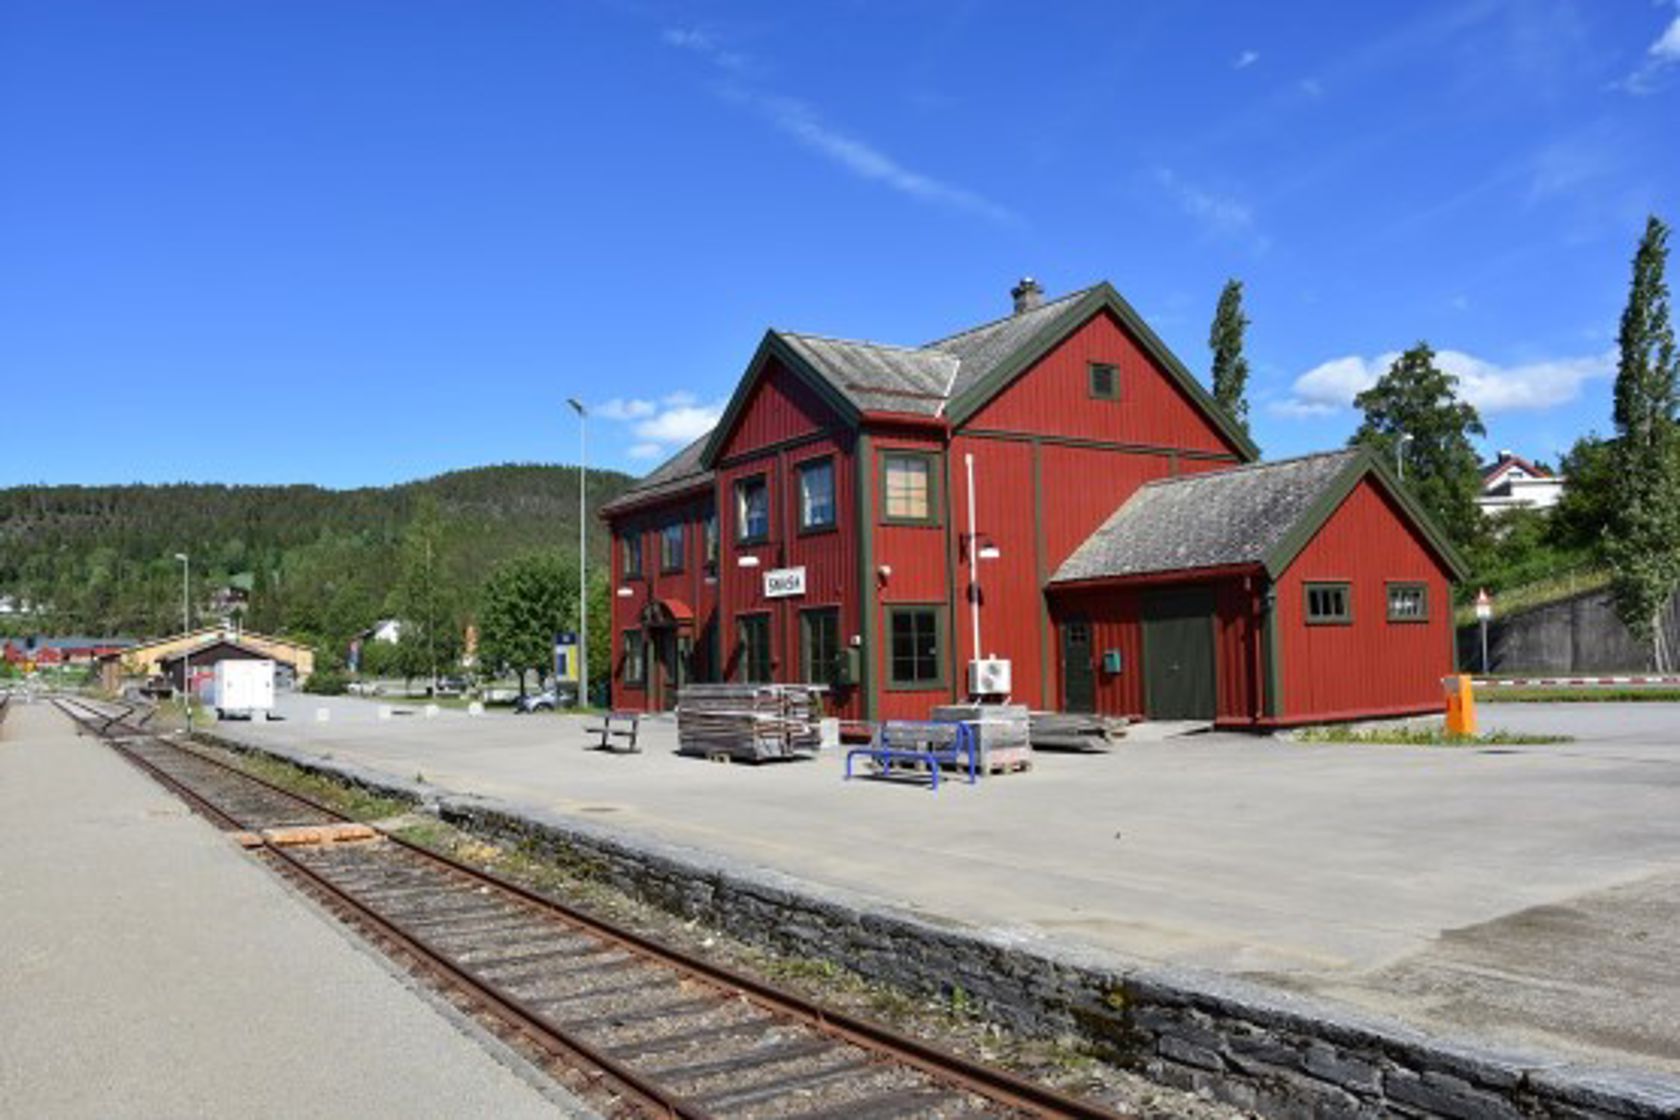 Exterior view of Snåsa station